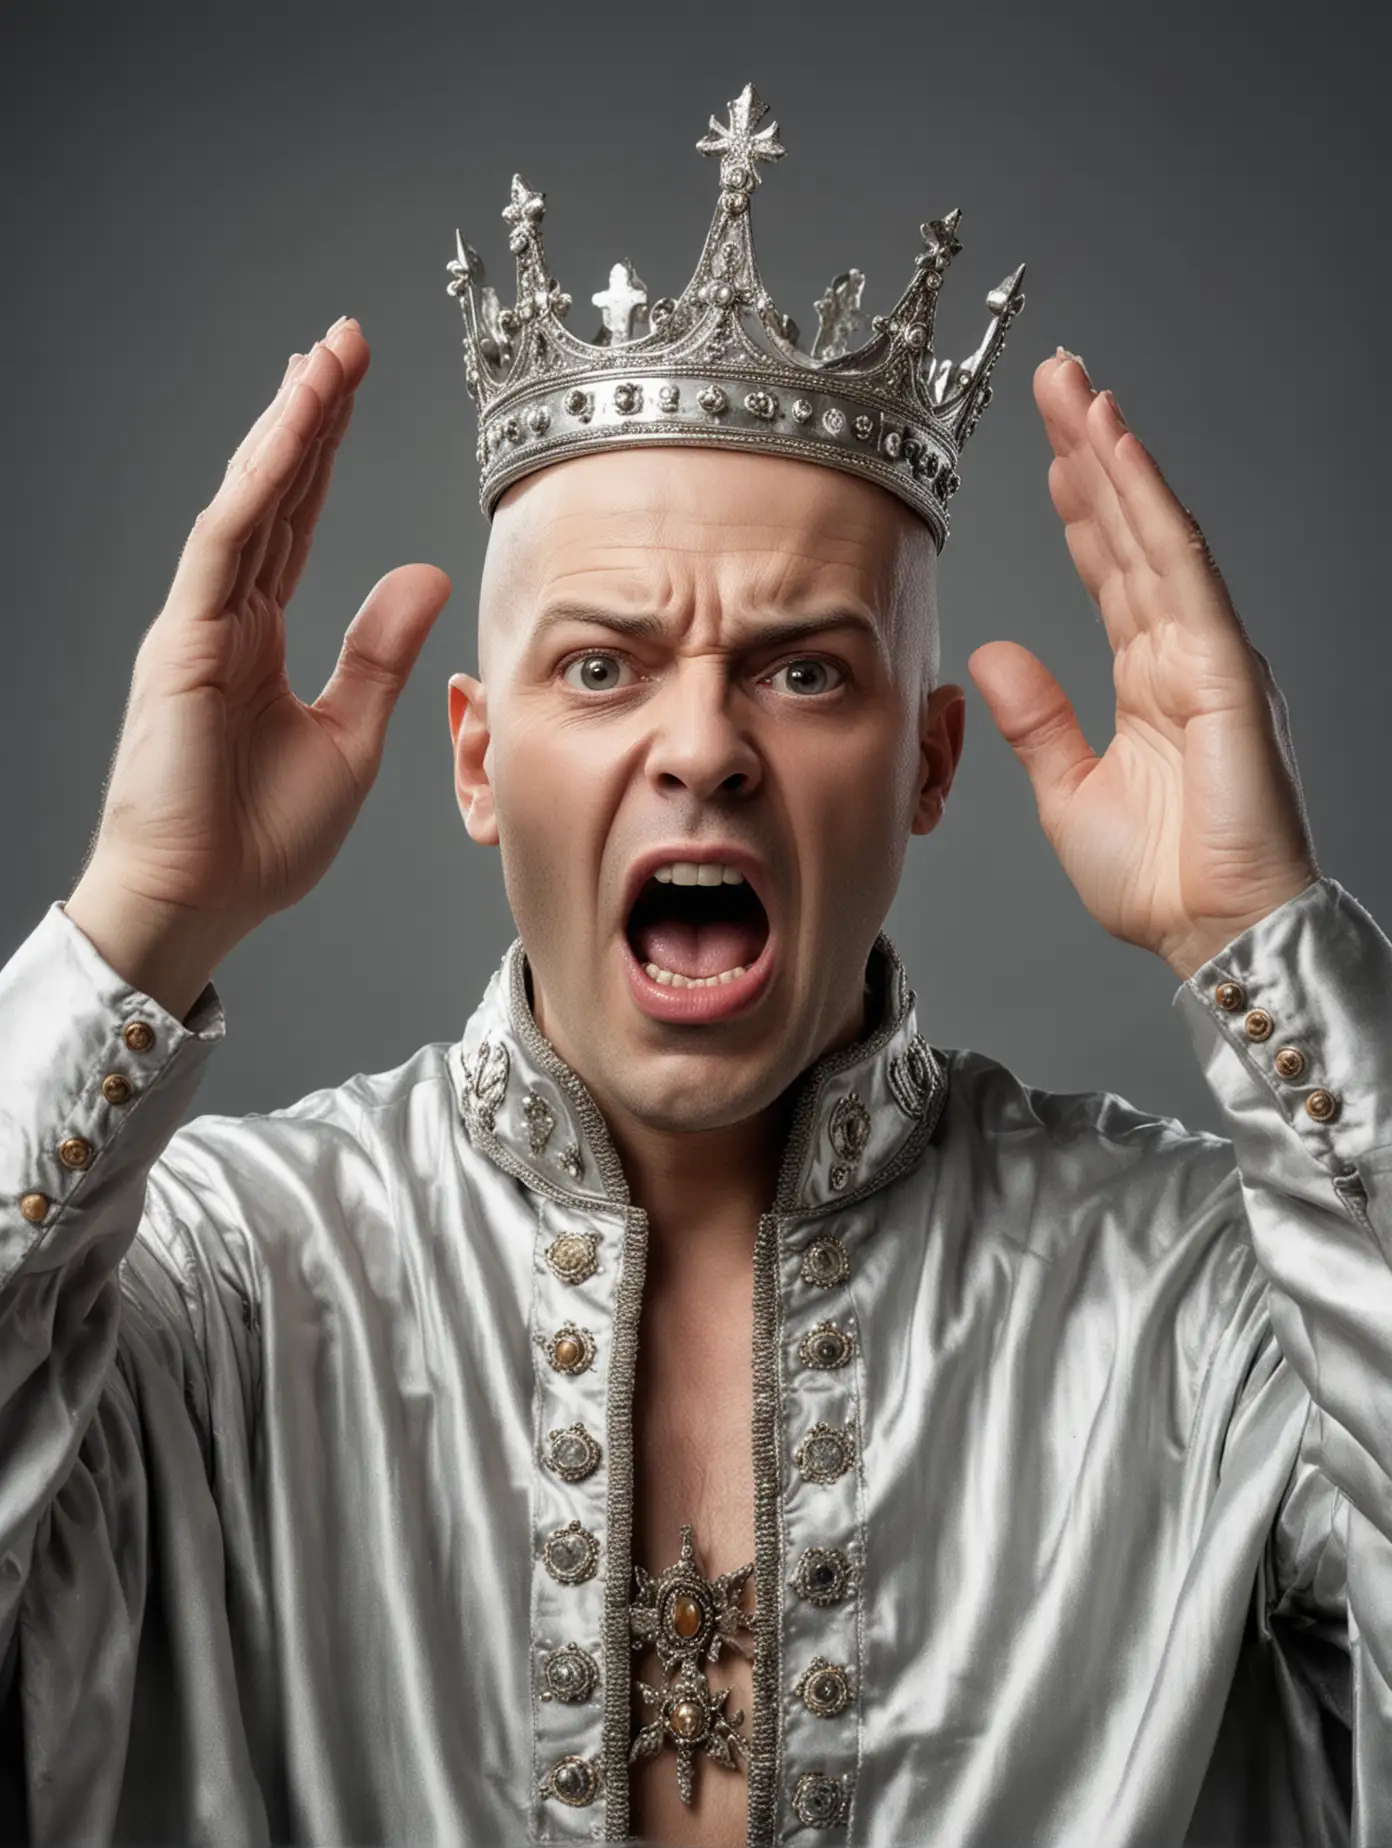 Shocked Bald King with Open Mouth and Hands on Head Silver Crown